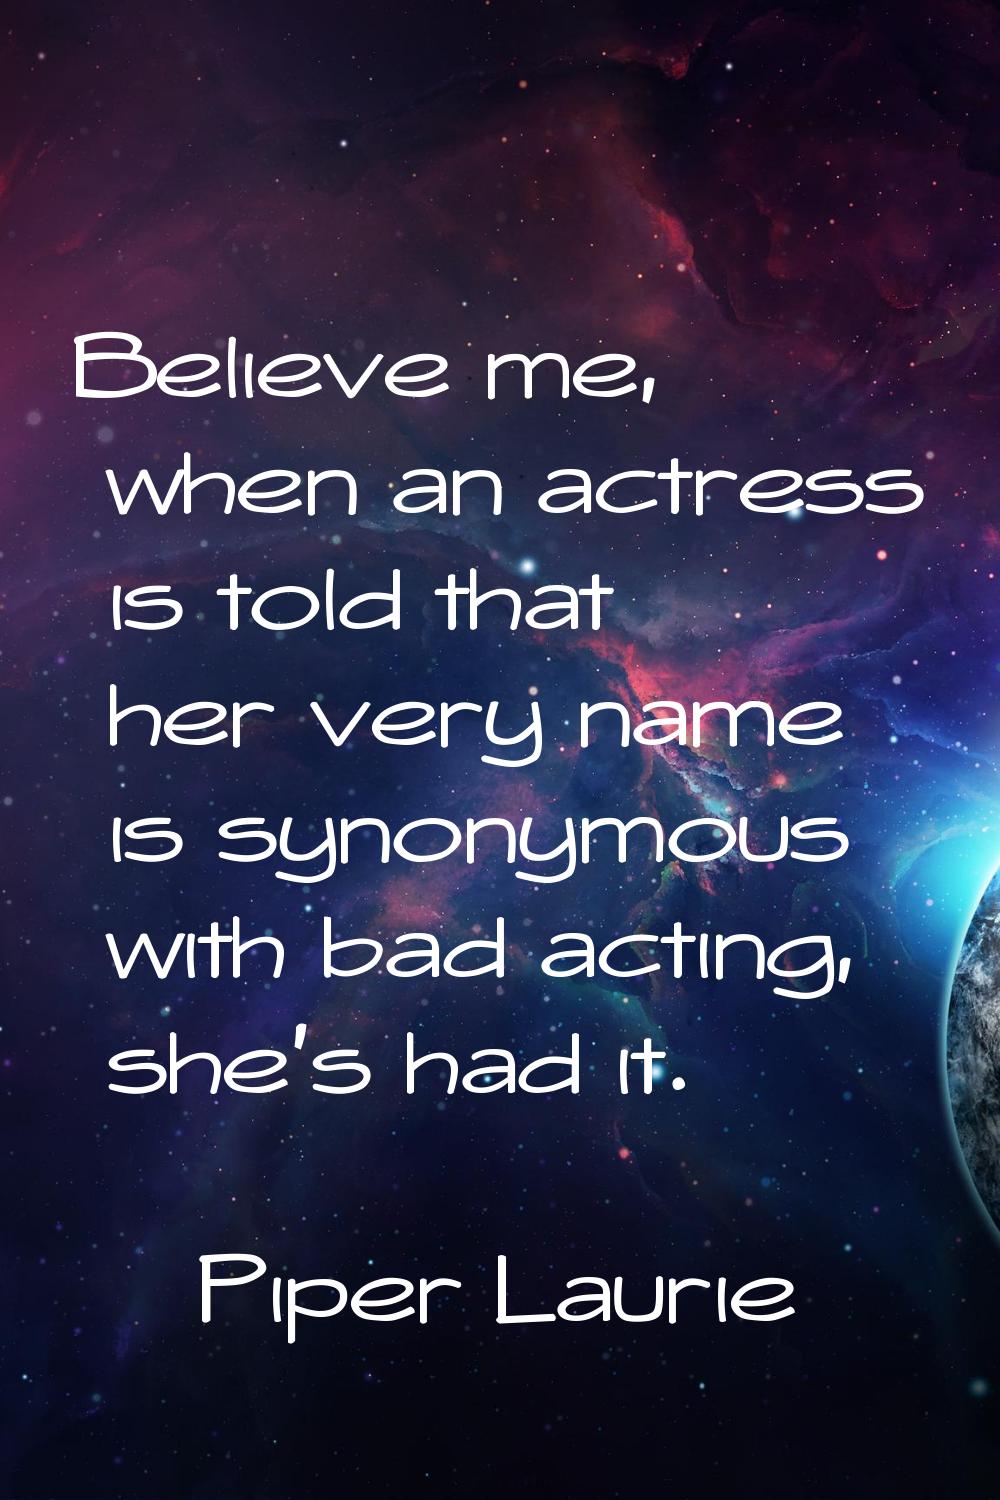 Believe me, when an actress is told that her very name is synonymous with bad acting, she's had it.